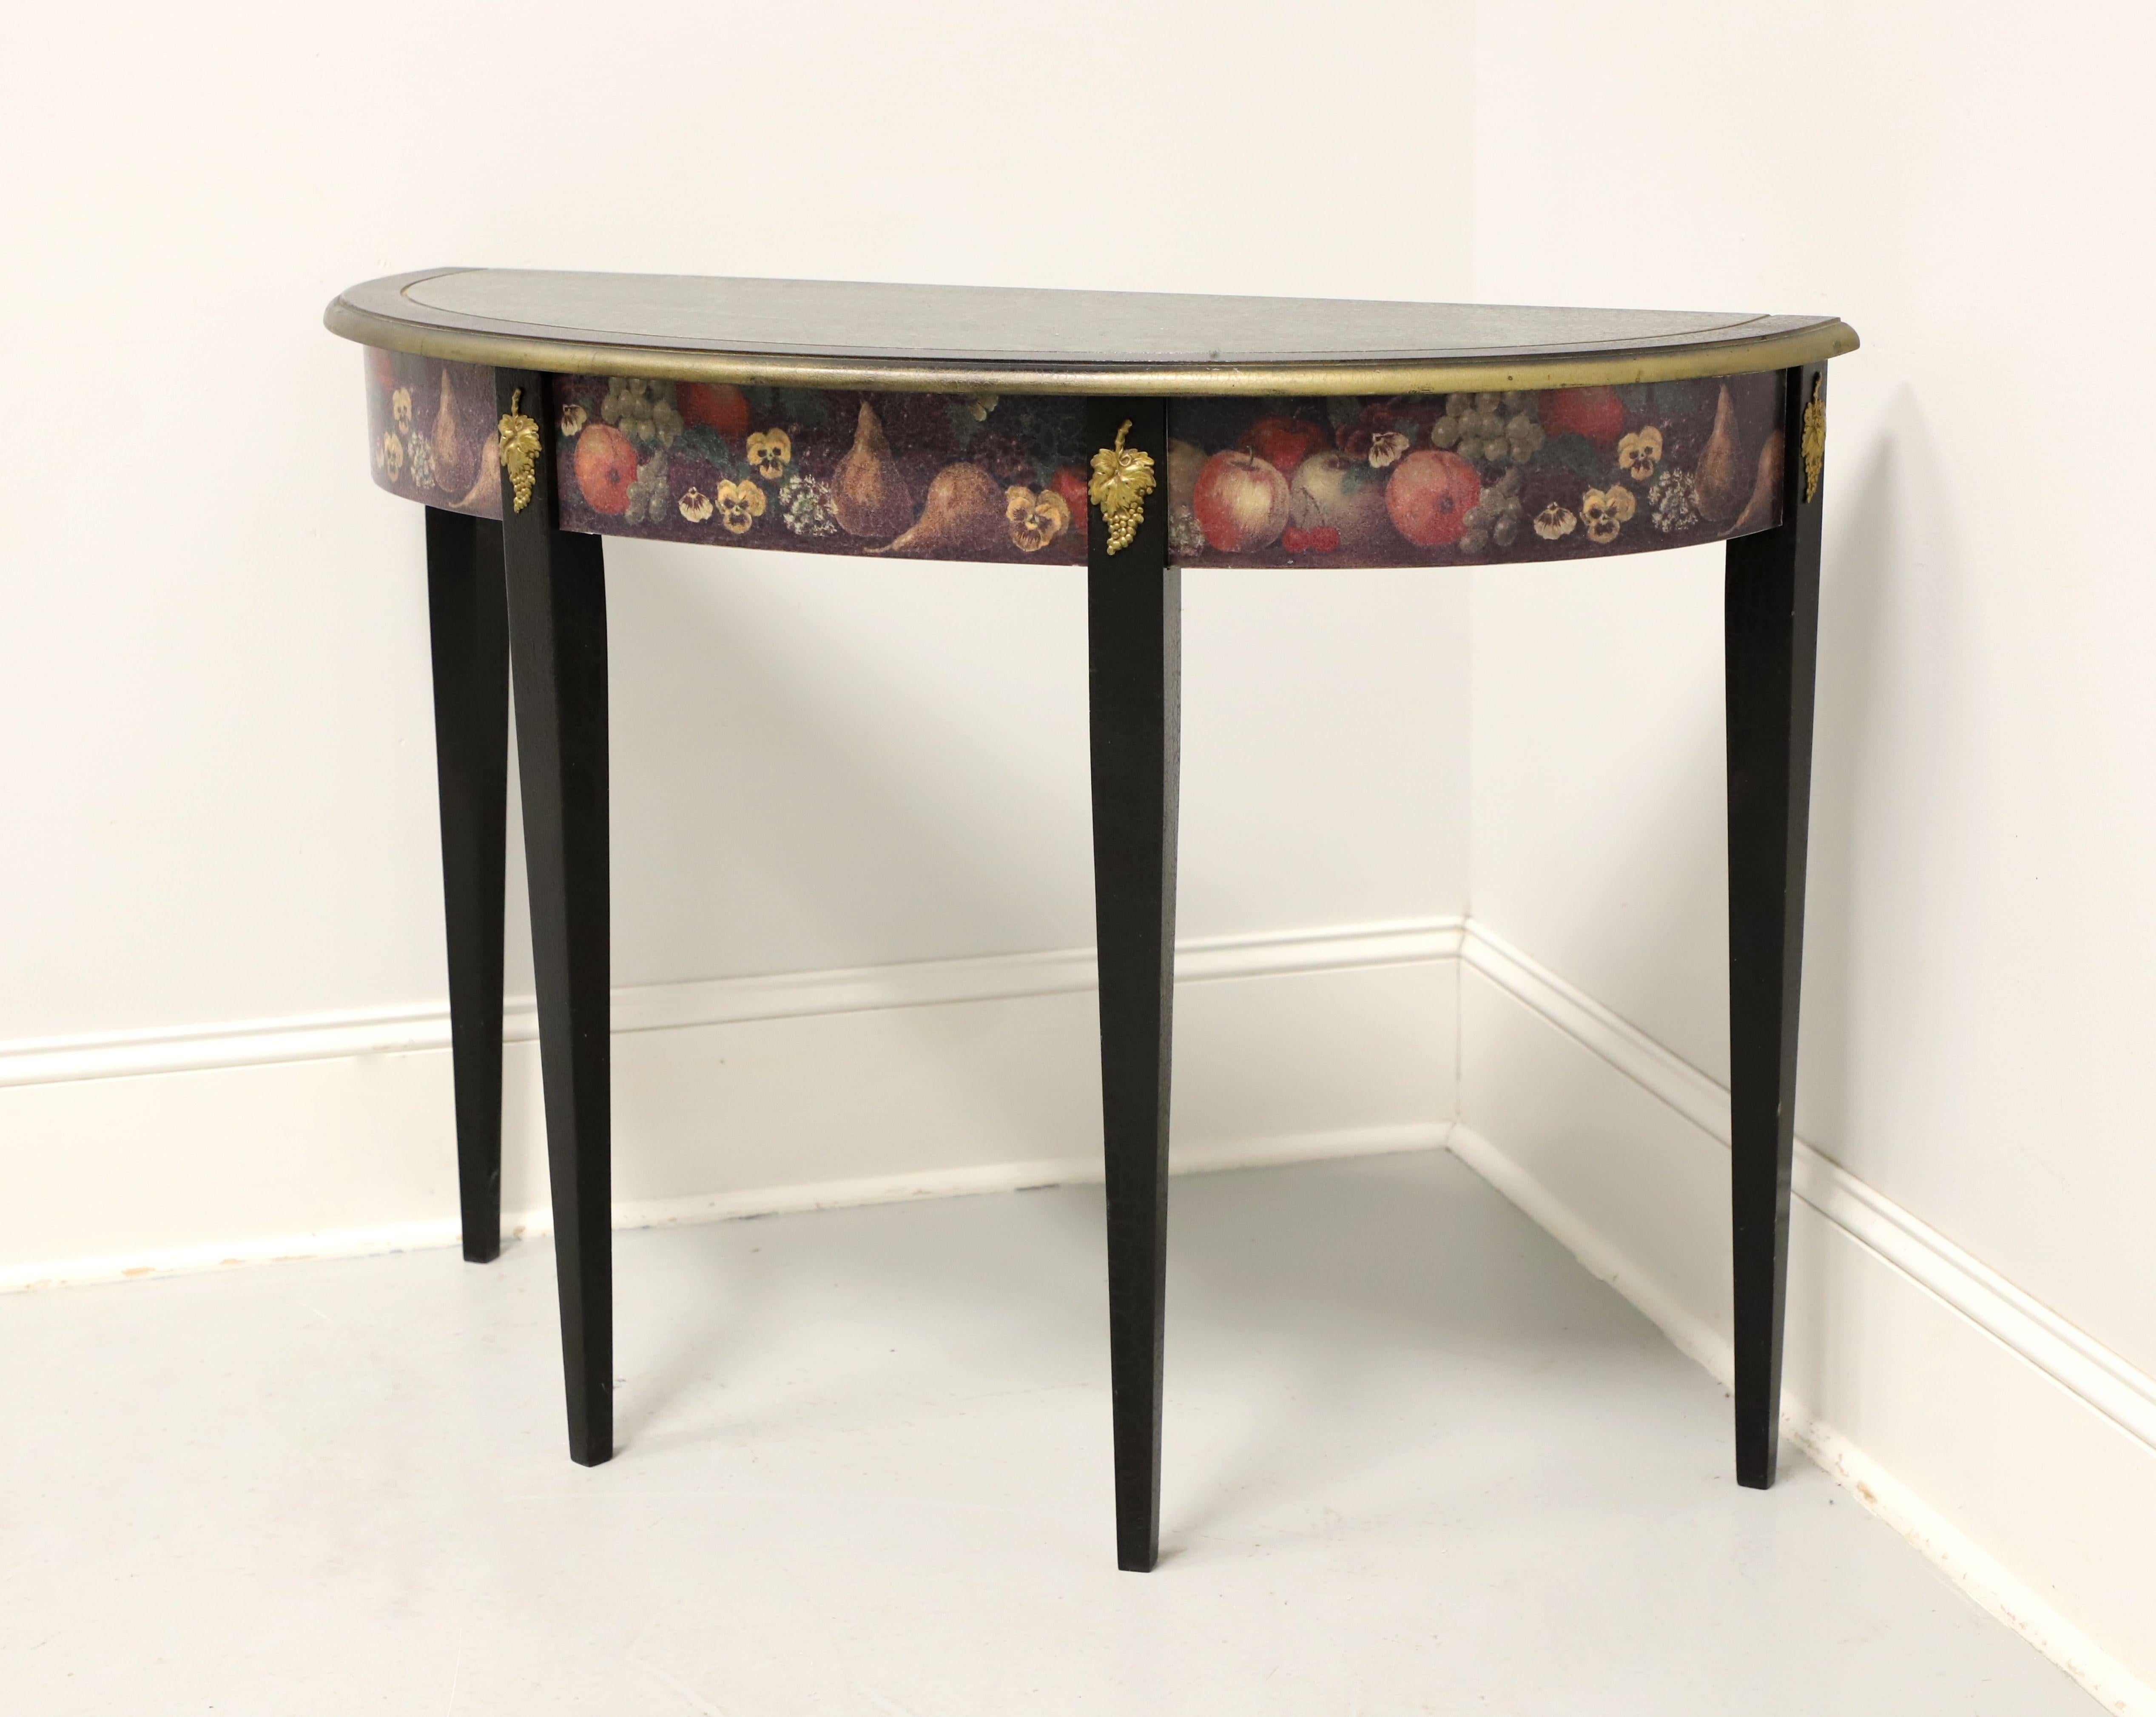 Philippine Painted Hepplewhite Style Fruit Motif Demilune Console Table For Sale